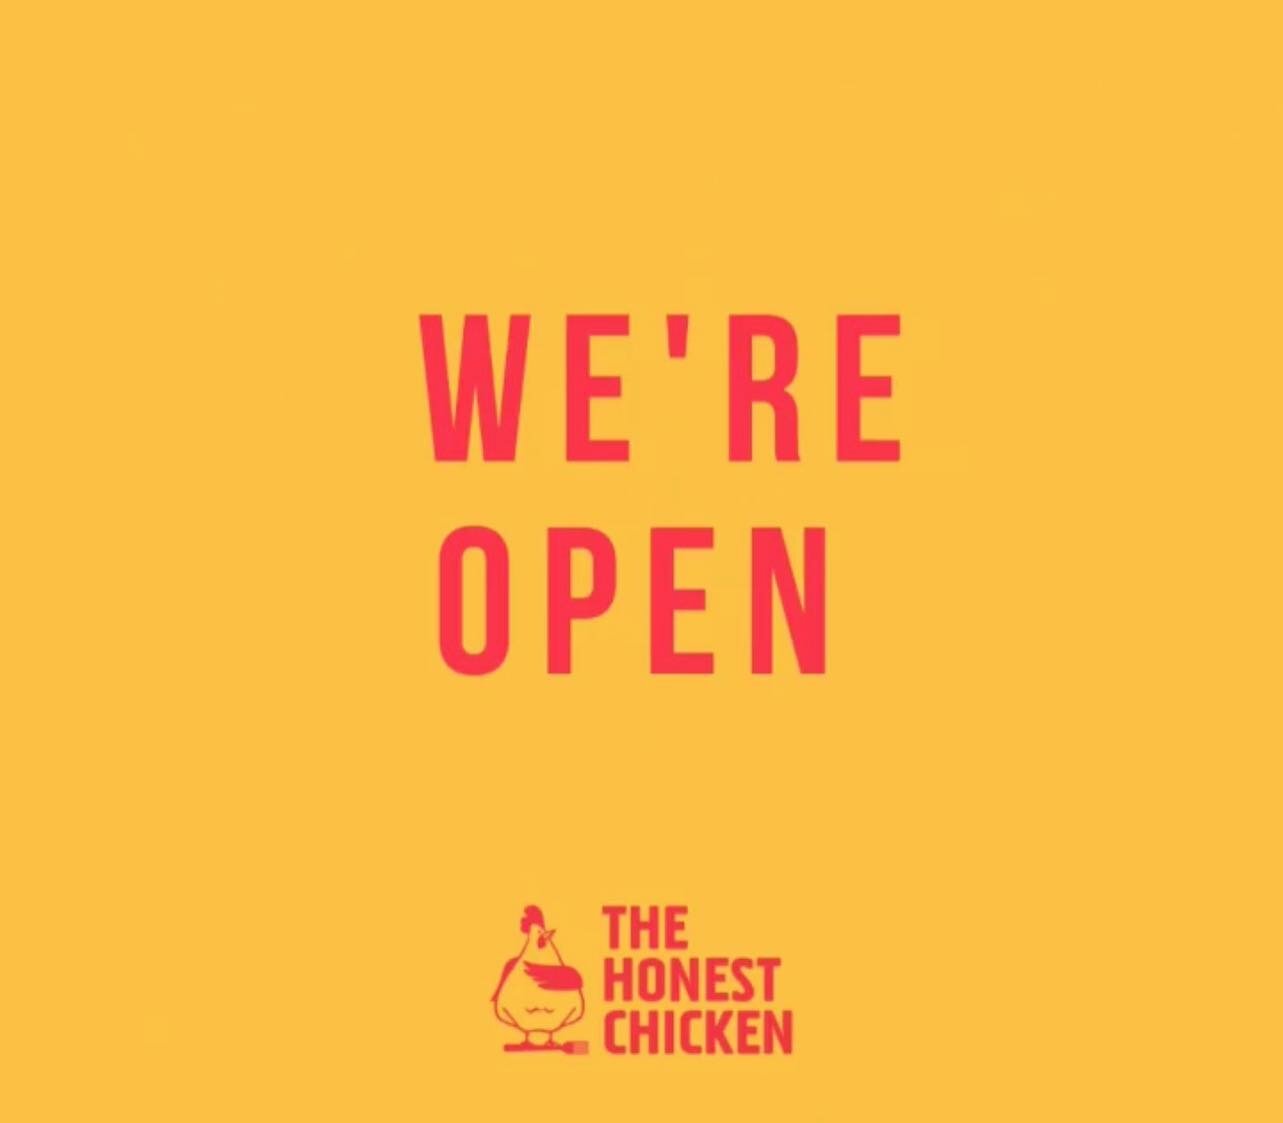 On this special public holiday The Honest Chicken Newport and Belrose is open as normal. See you soon! 
.
.
.
#thehonestchicken #rotisseriechicken #goodfood #fastfood #healthyfood #healthysalads #hotfood #burgersandfries #belrose #newport #newportbea